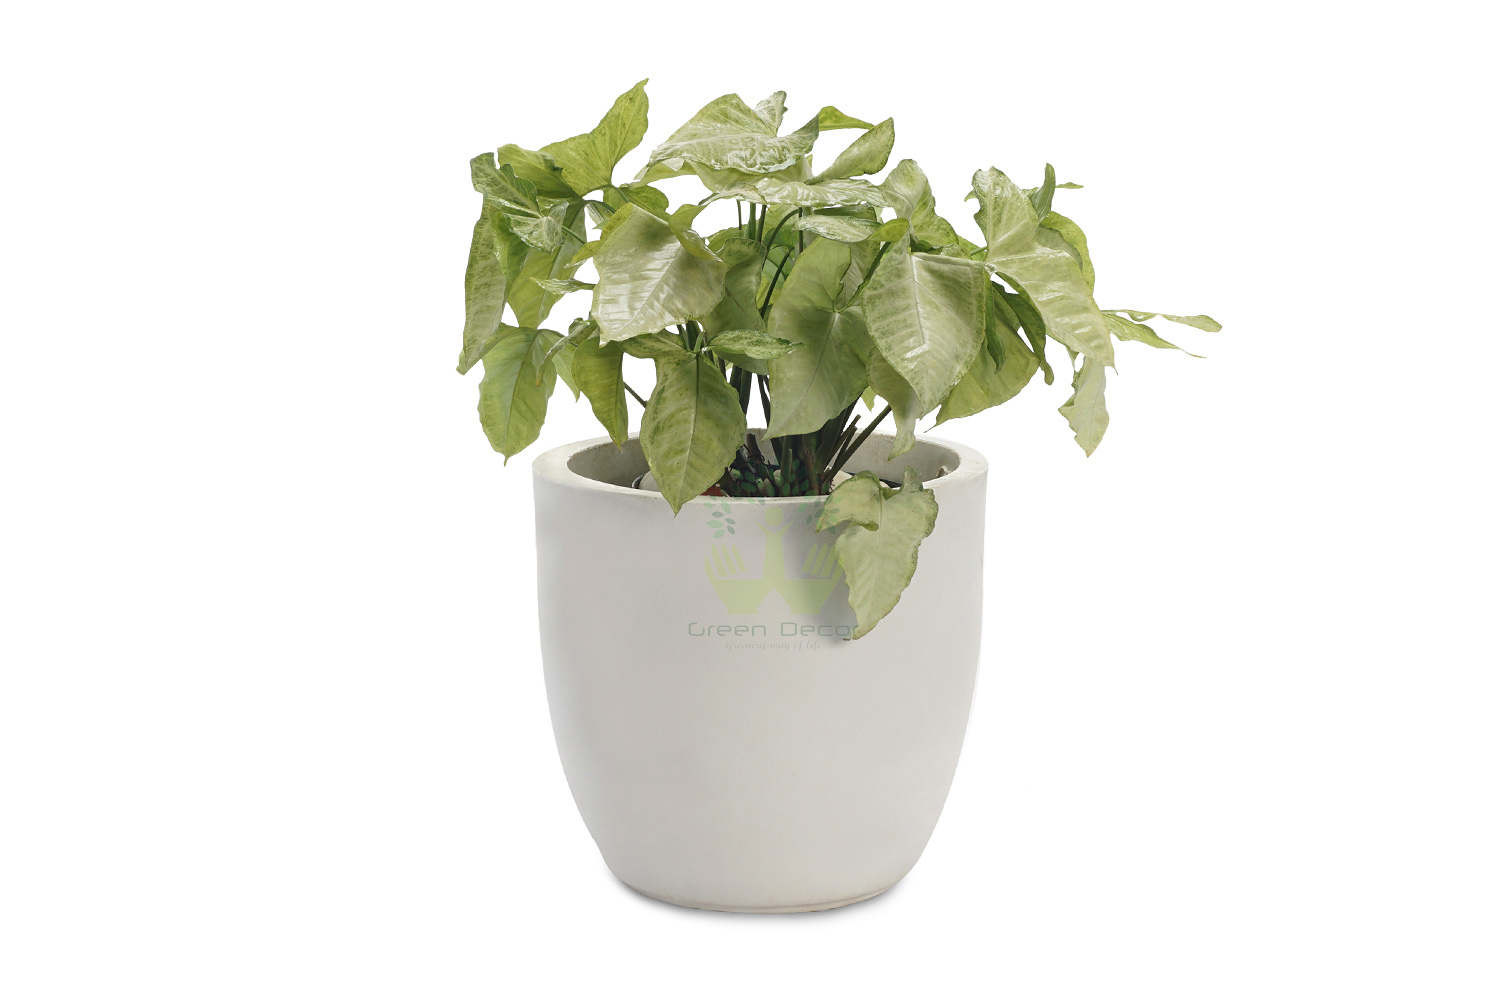 Buy Syngonium Plants , White Pots and seeds in Delhi NCR by the best online nursery shop Greendecor.